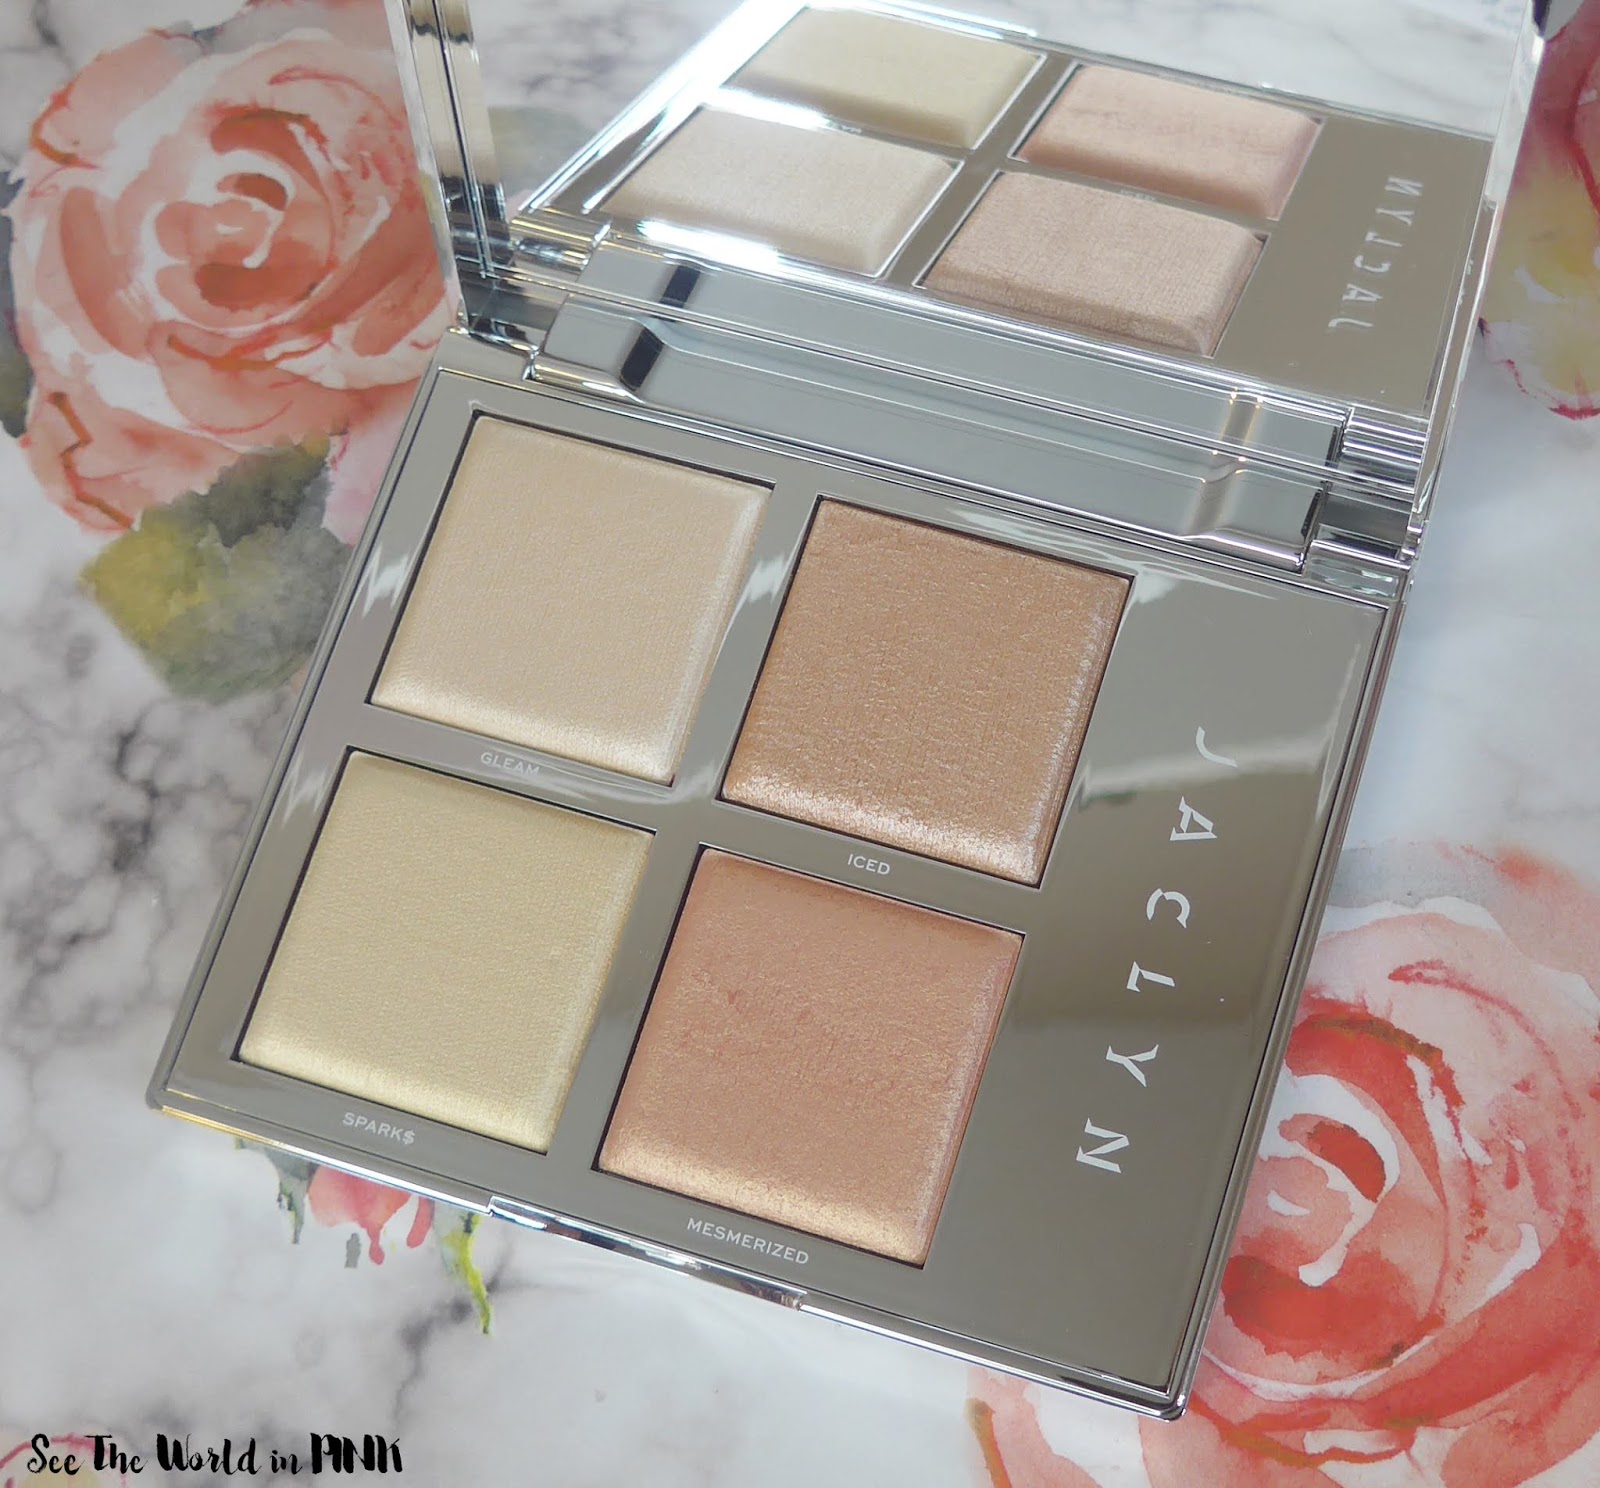 Jaclyn Cosmetics Accent Light Highlighter Palette - The Flash